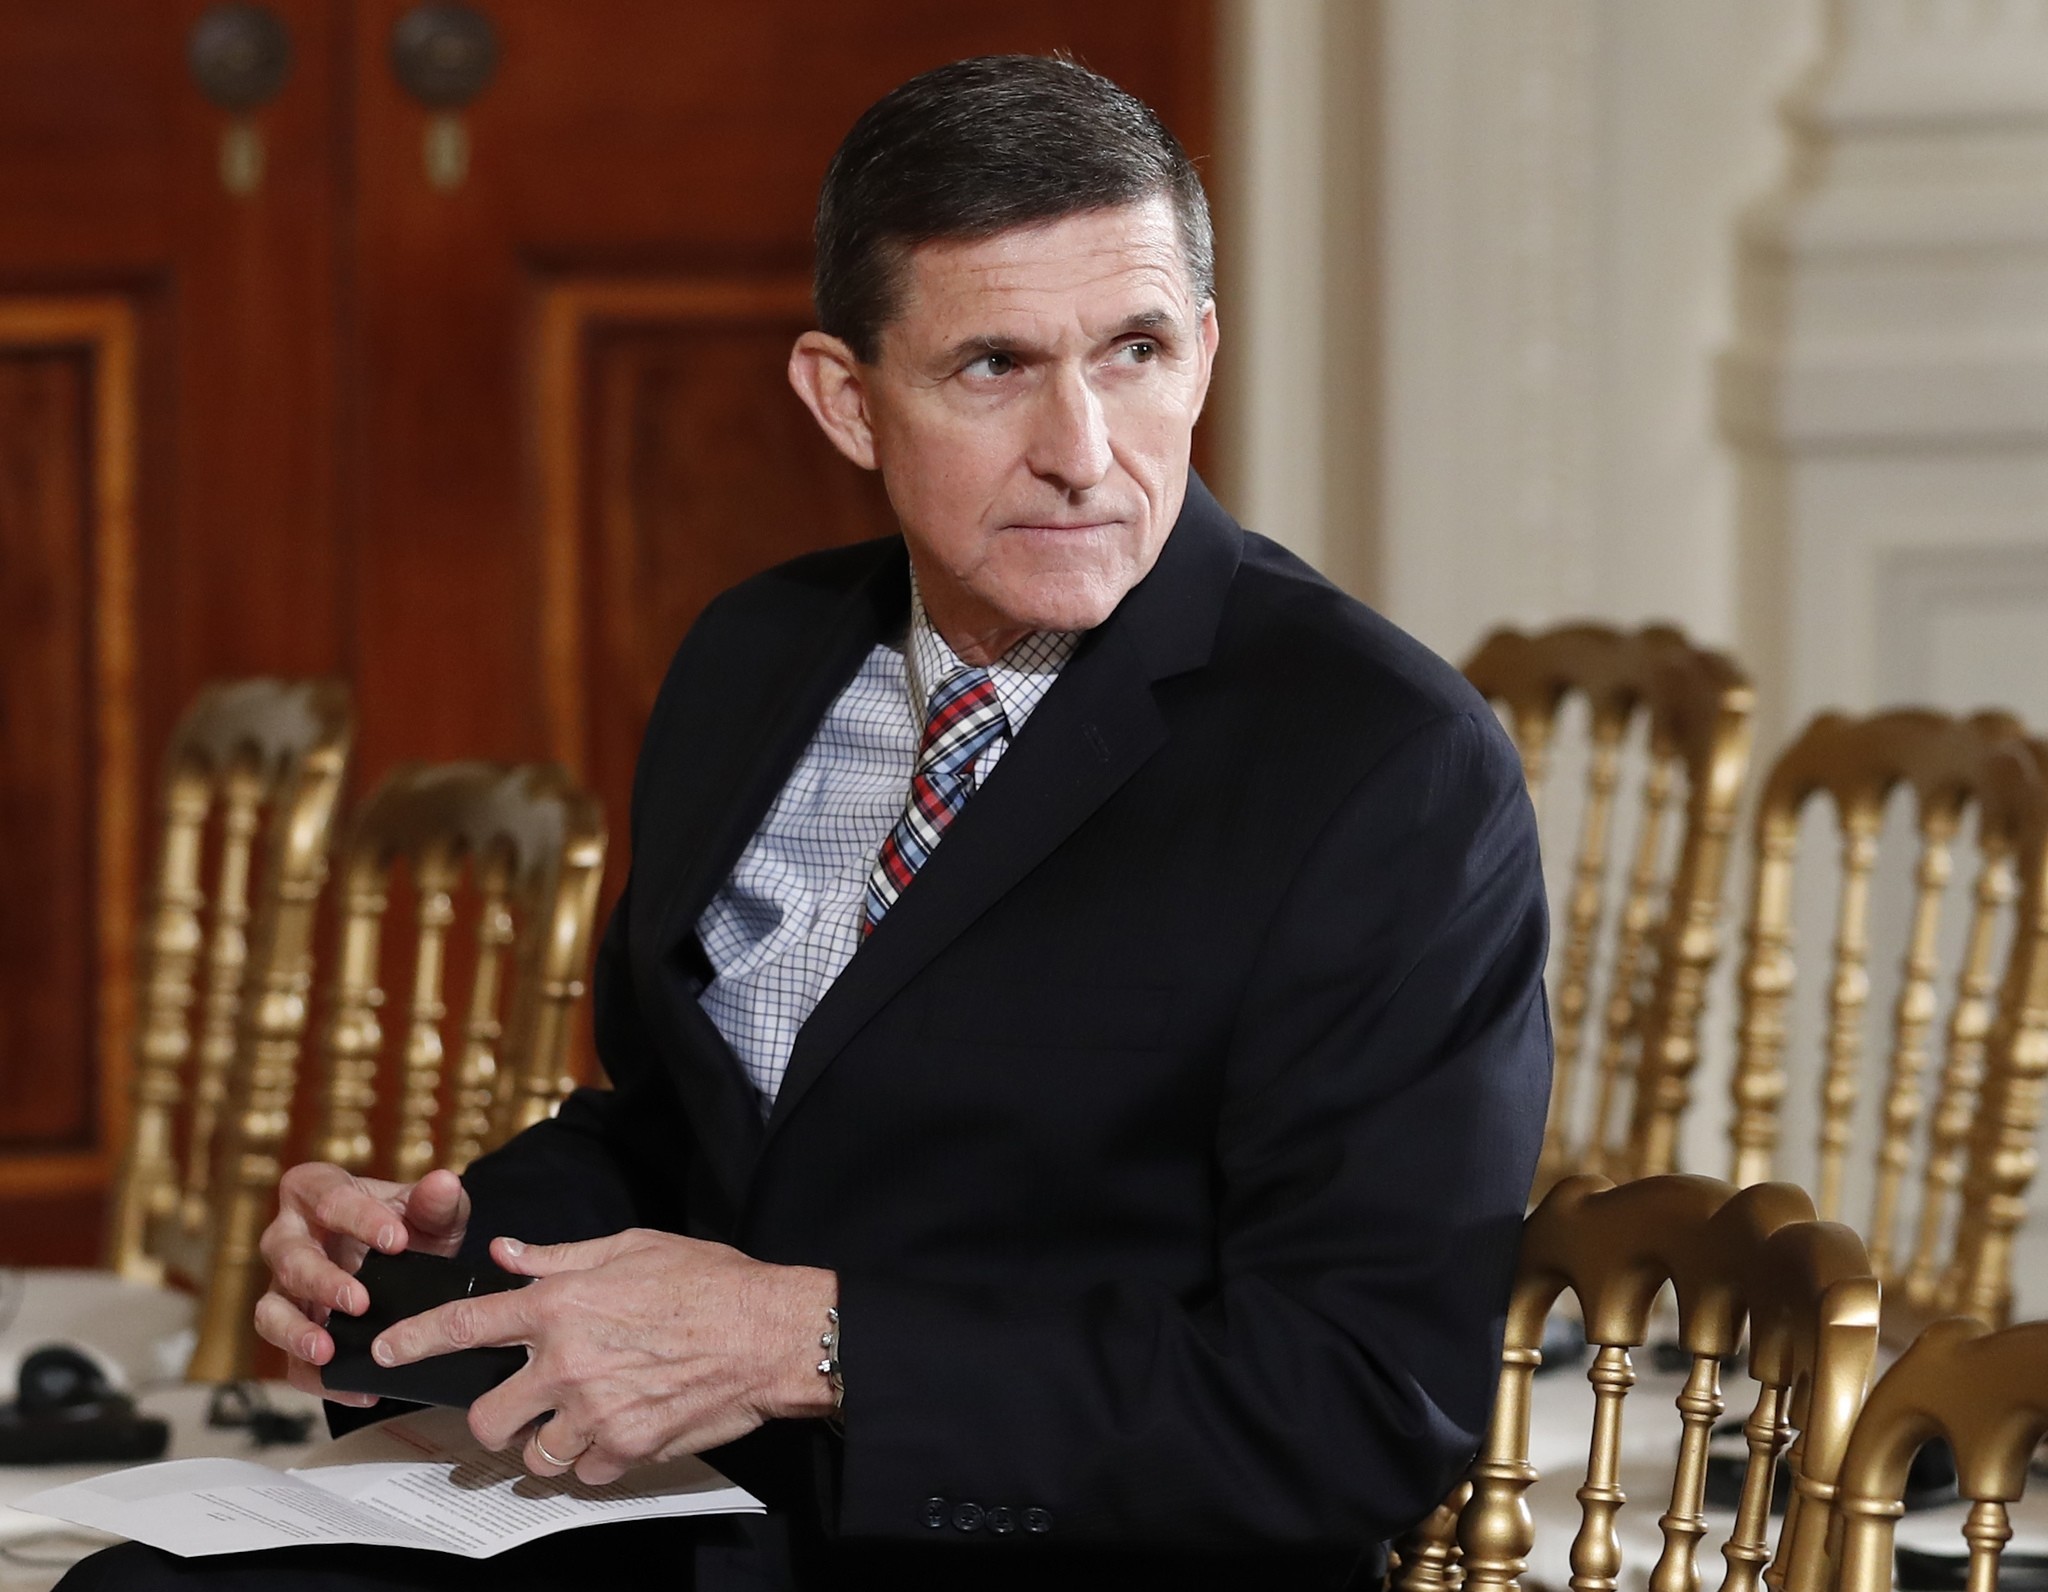 In this Feb. 10, 2017 file photo, then-National Security Adviser Michael Flynn sits in the East Room of the White House in Washington. (AP Photo)